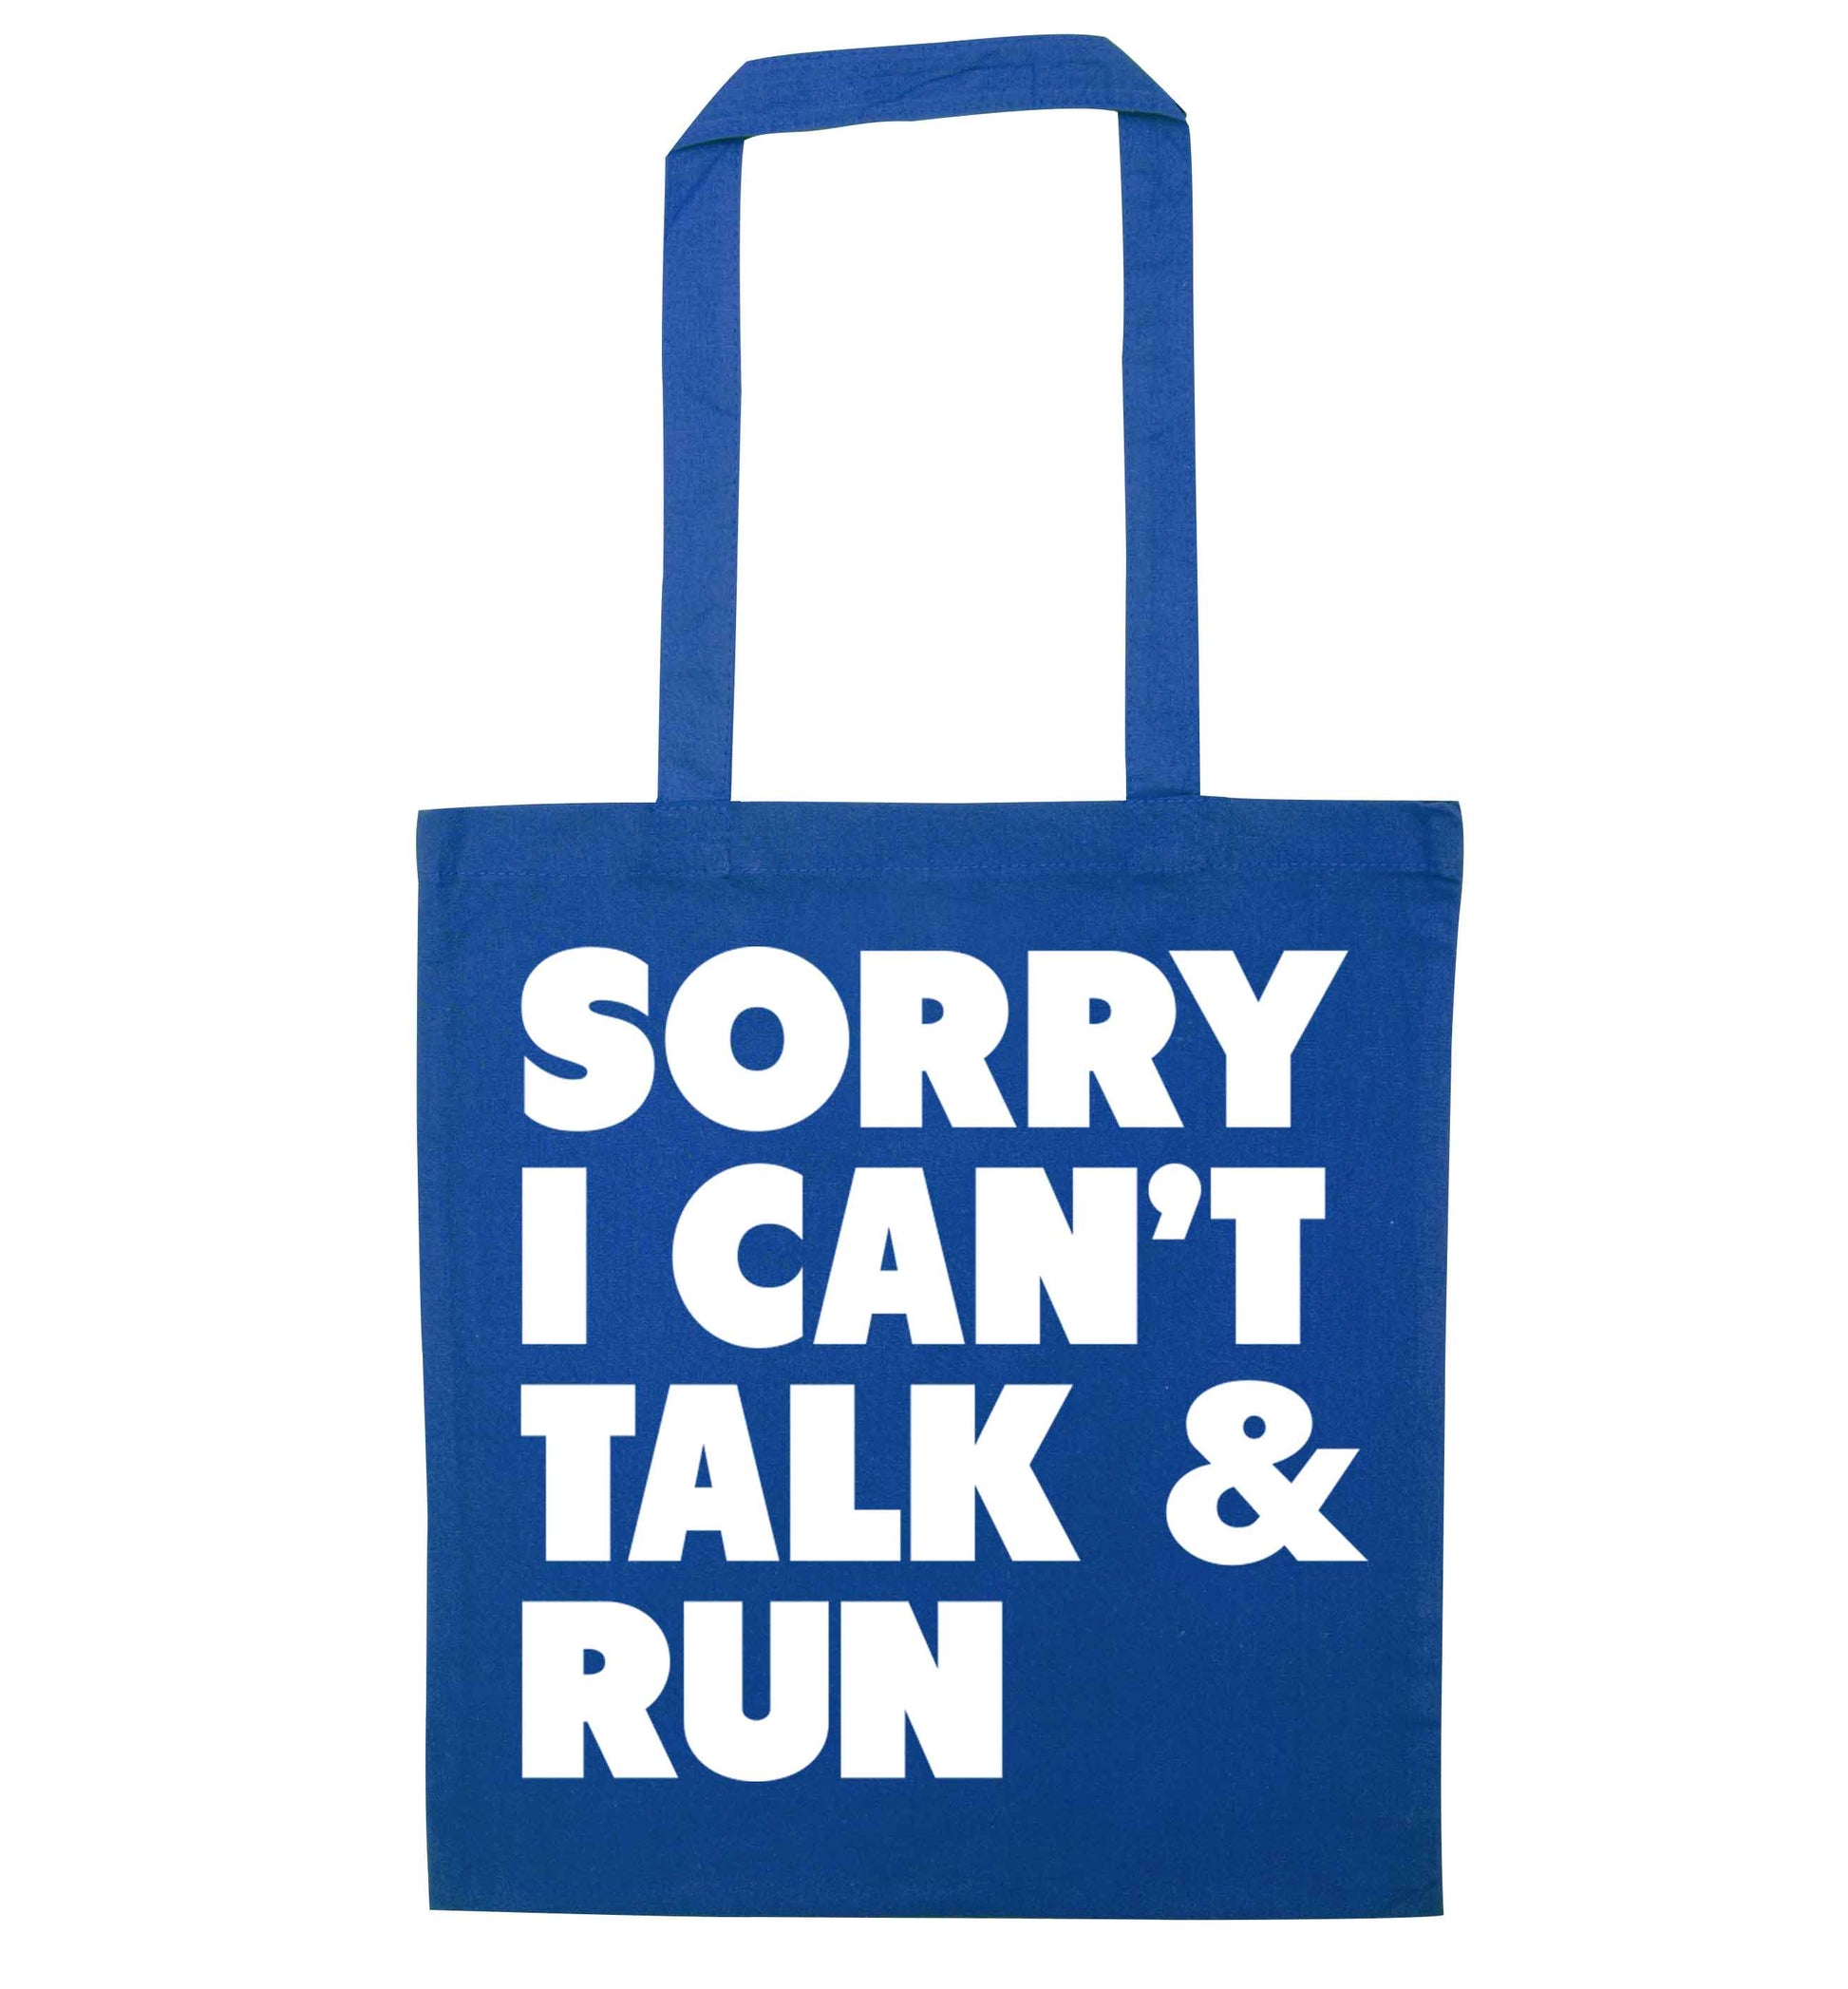 Sorry I can't talk and run blue tote bag